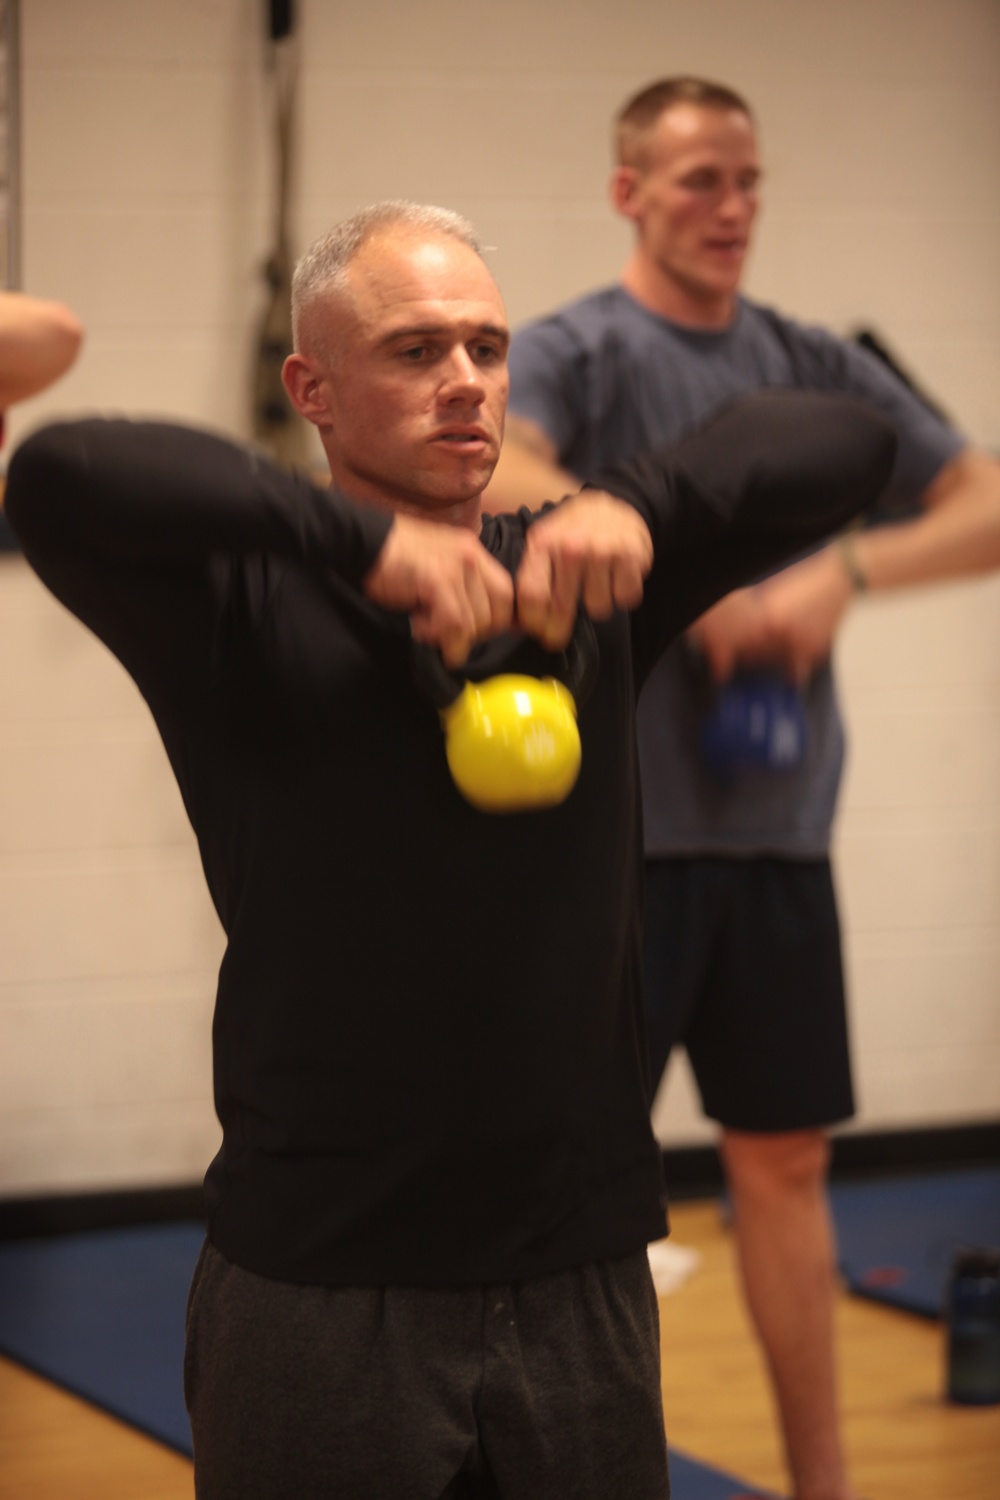 Combat Fitness Workshop offer variety to service members' workouts